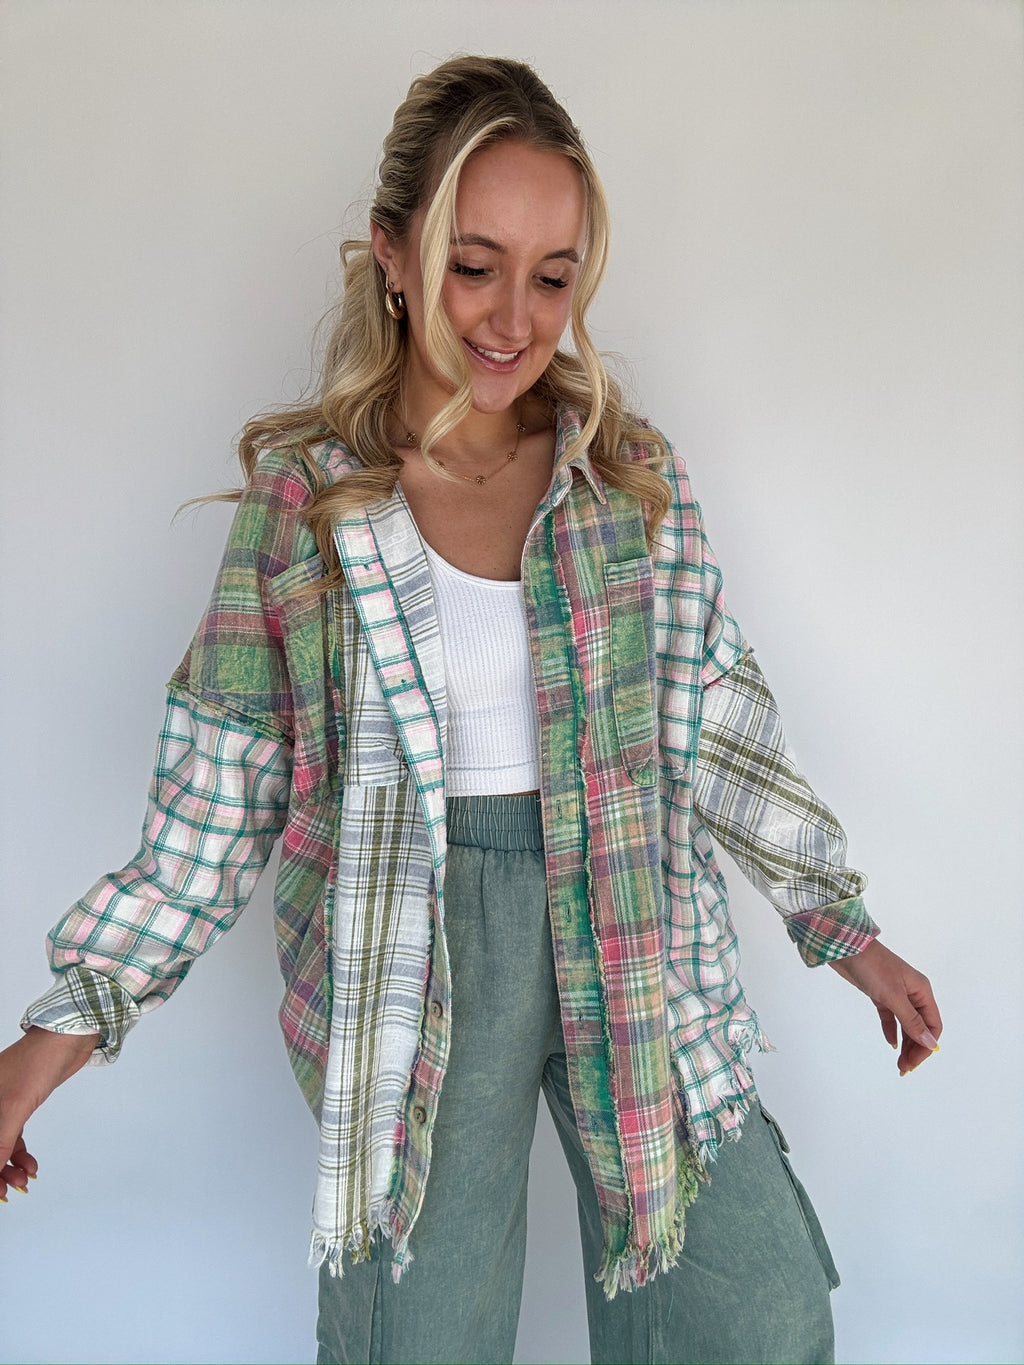 Rockport Mixed Plaid Top - Green